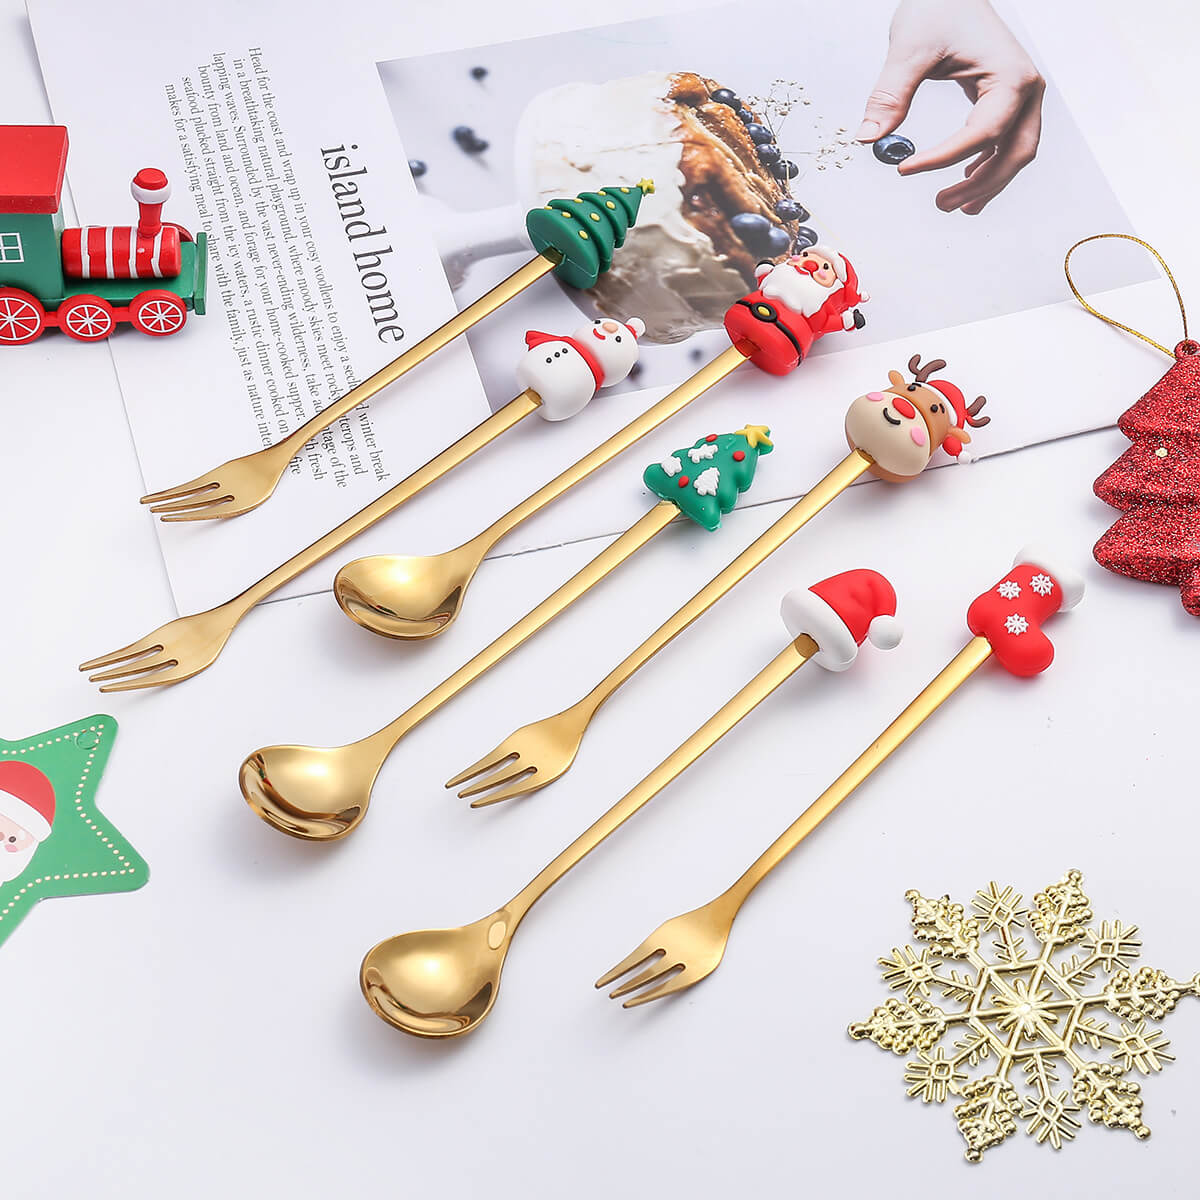 Spoons and Forks Set for Christmas 6pcs Stainless Steel Funny Tableware Cooking Gifts for Mom